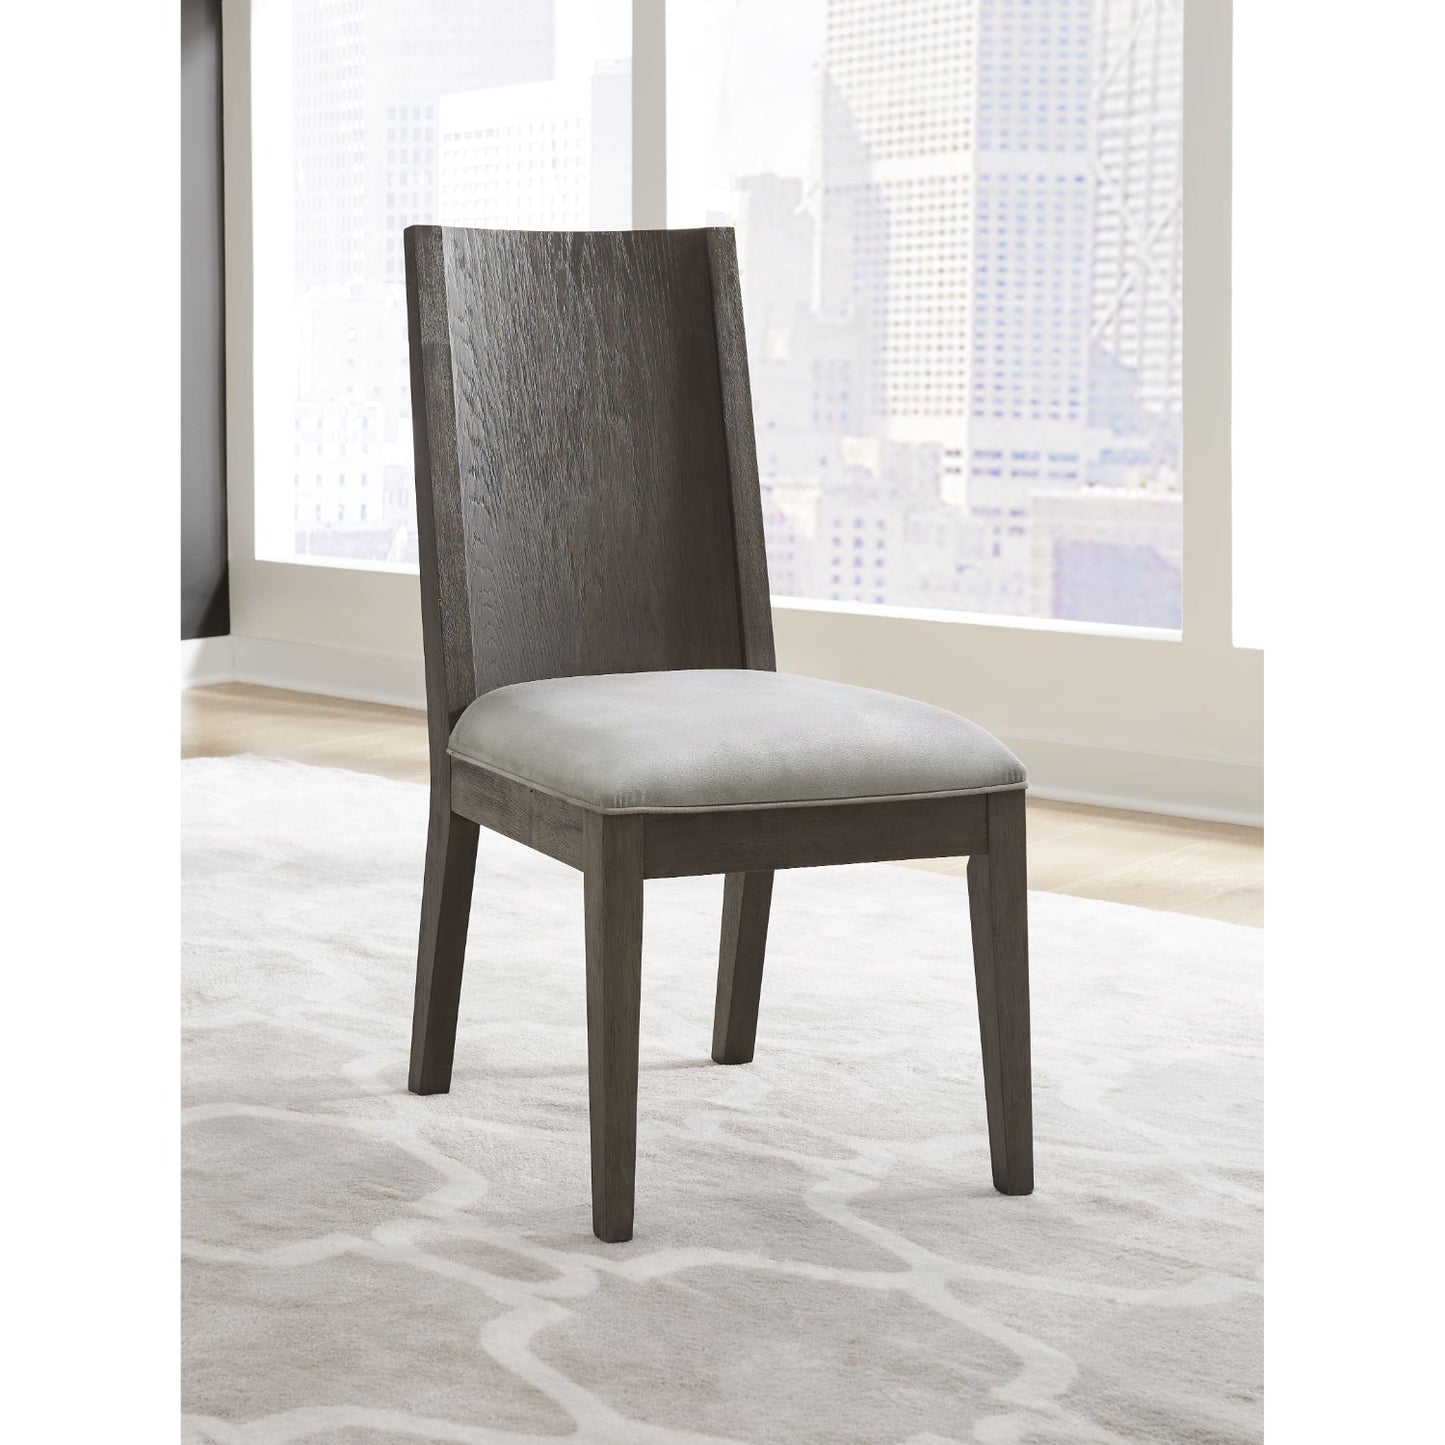 Modus Plata 2 Dining Chair in Thunder Grey